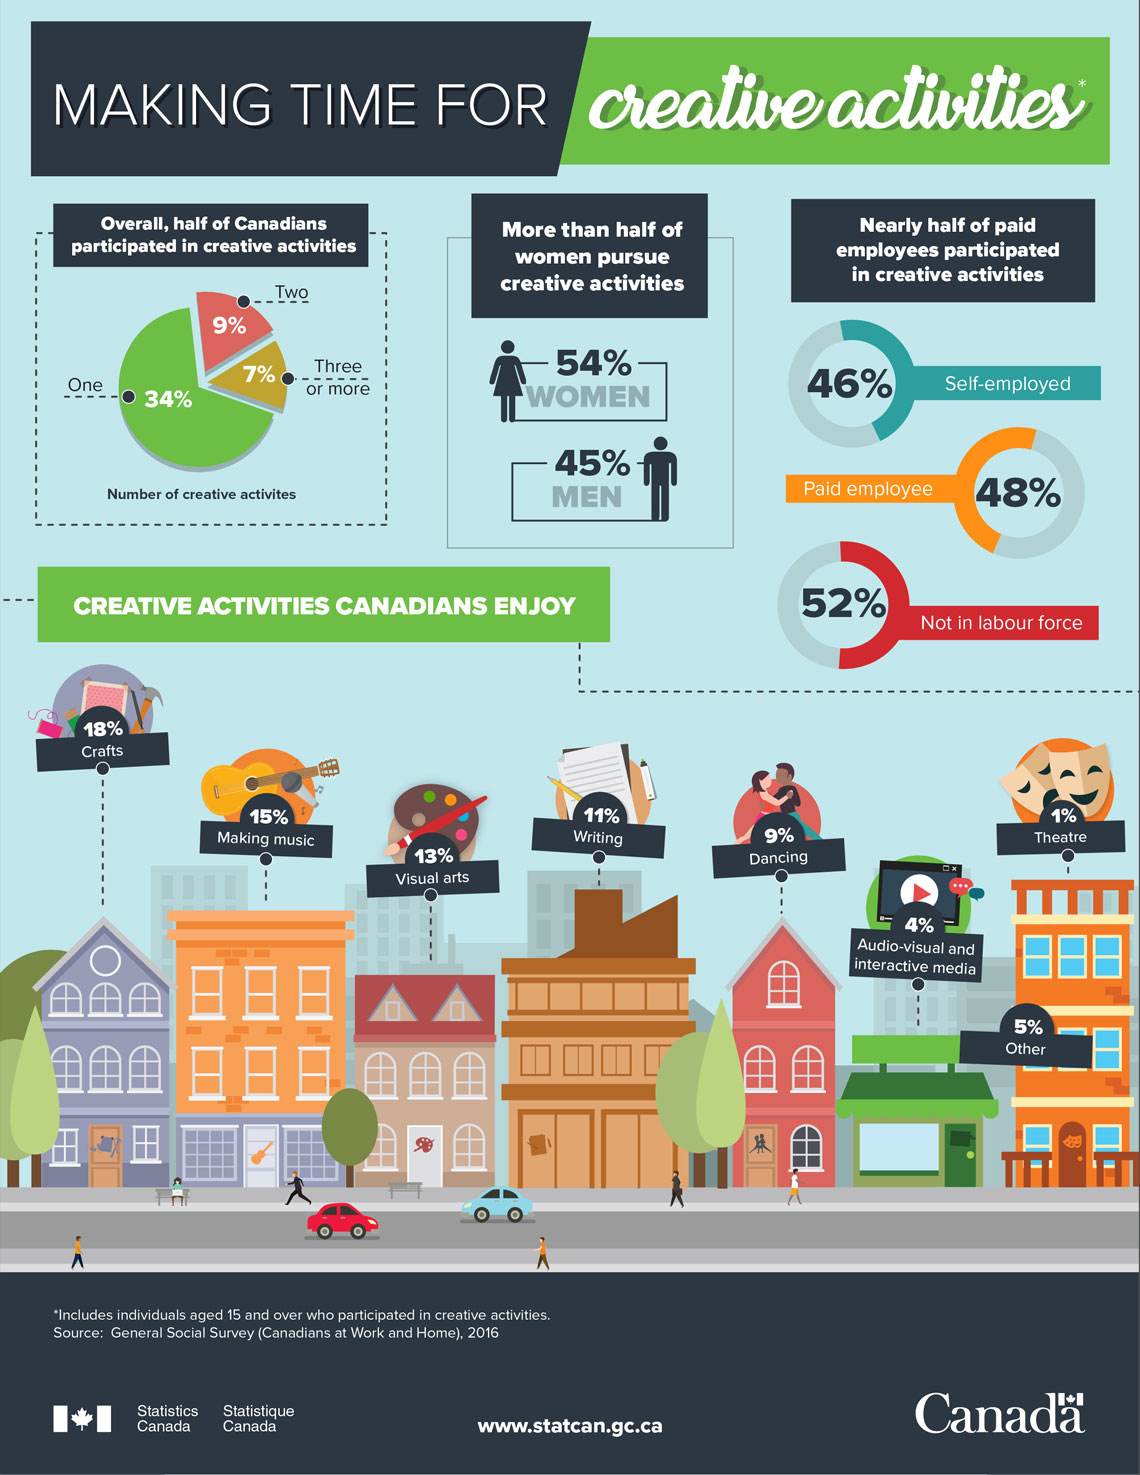 5 great examples how individual libraries promote themselves with infographics